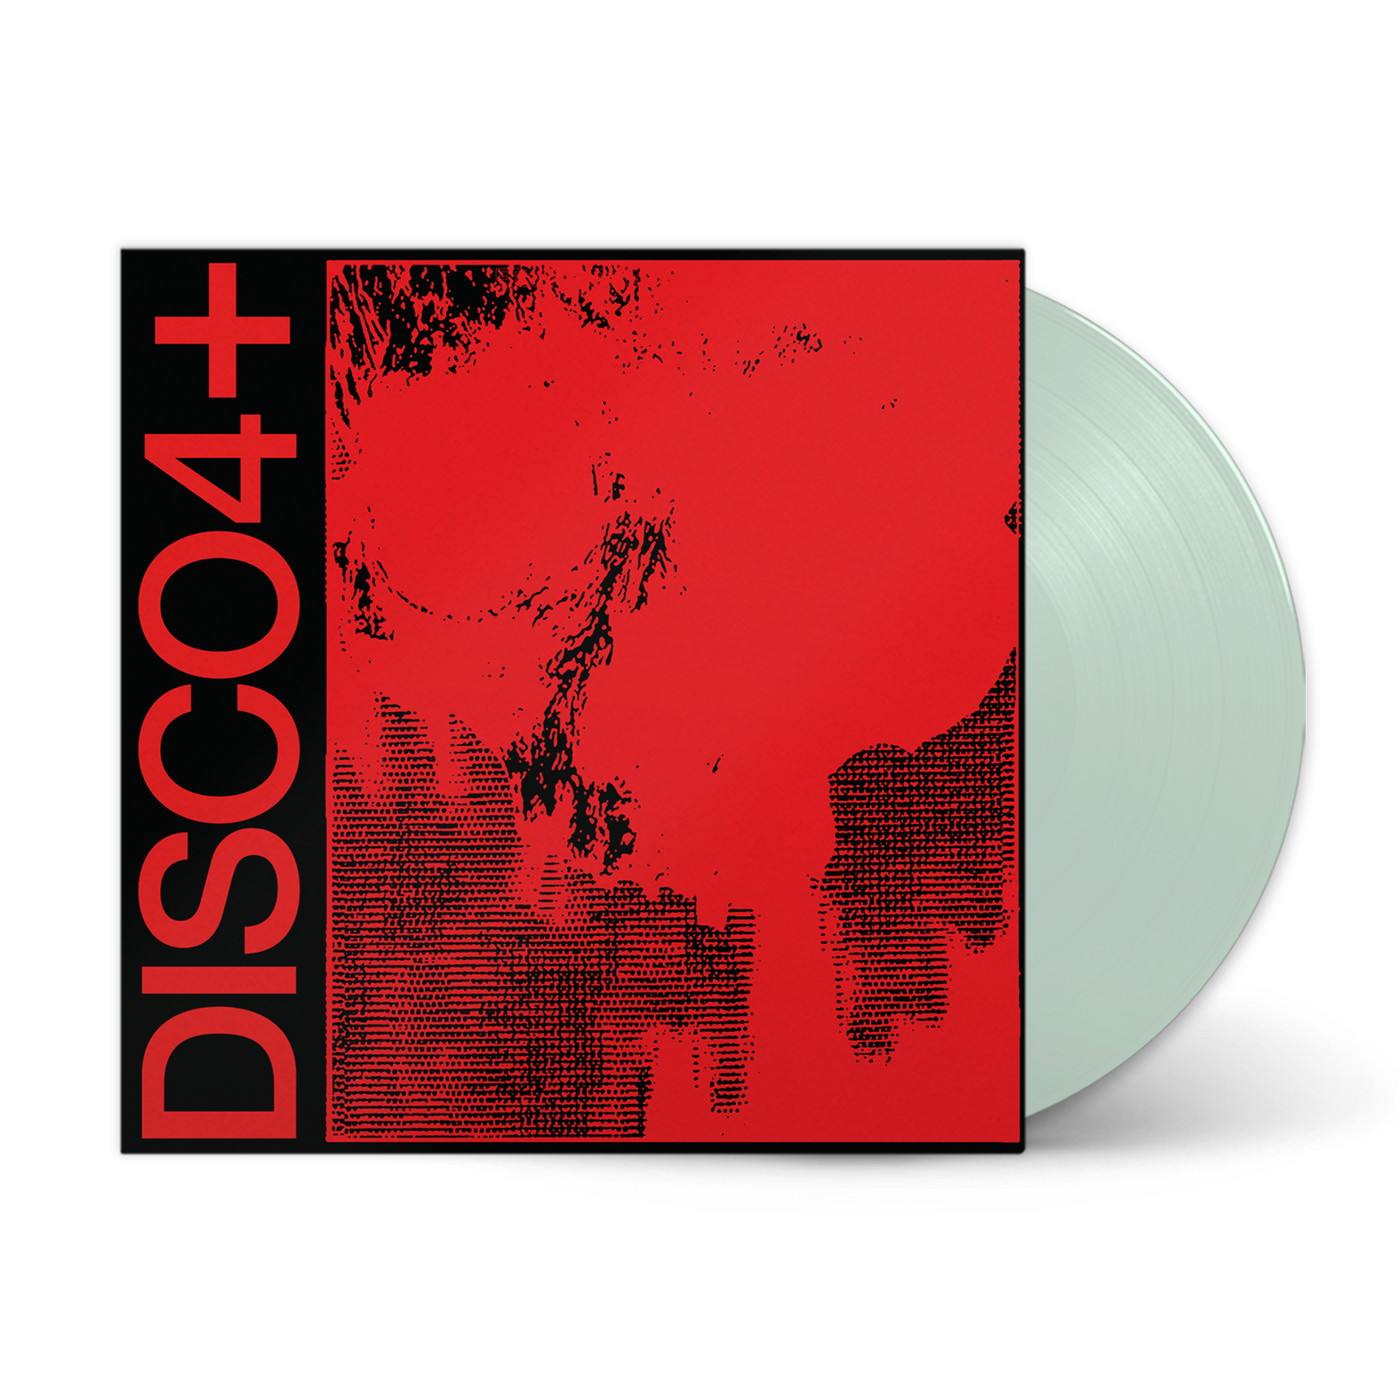 DISCO4+ Limited Edition Coke Bottle Clear Colored Vinyl